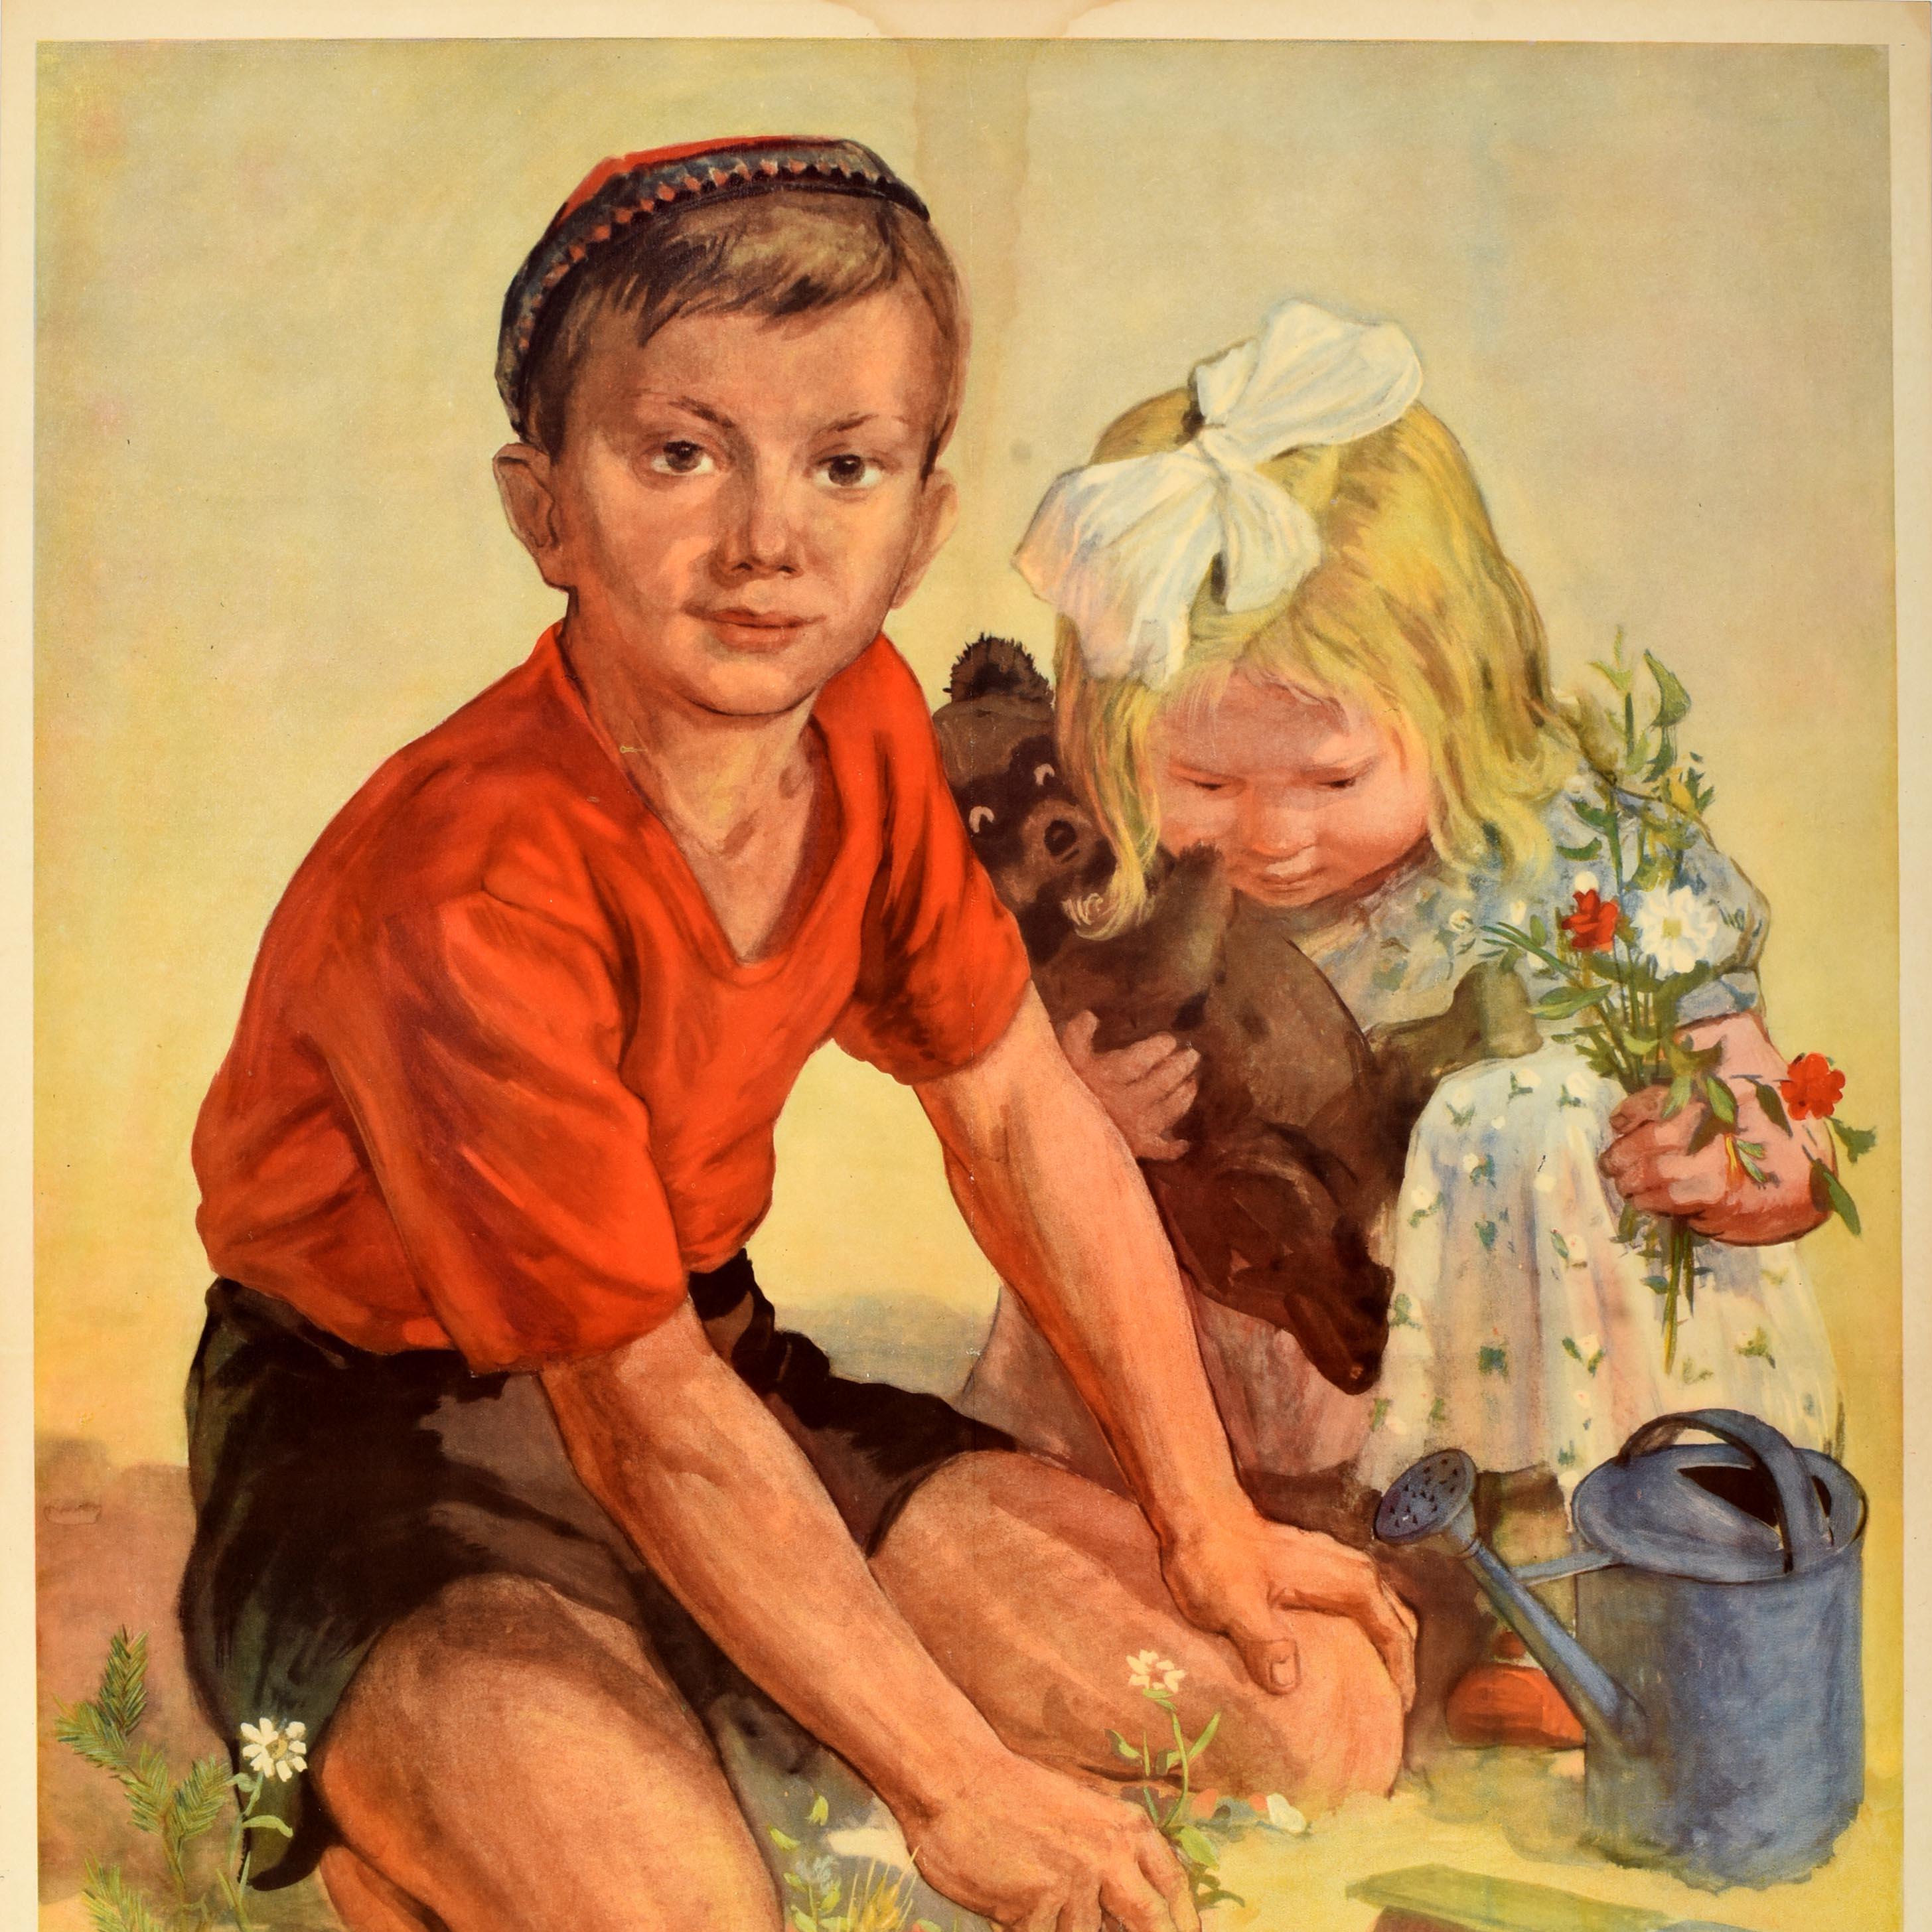 Original vintage Soviet propaganda poster - Peace to Children! / Мир детям! - featuring a painting of a young boy looking at the viewer while picking a daisy flower next to a watering can with a young girl beside him holding a teddy bear and a bunch